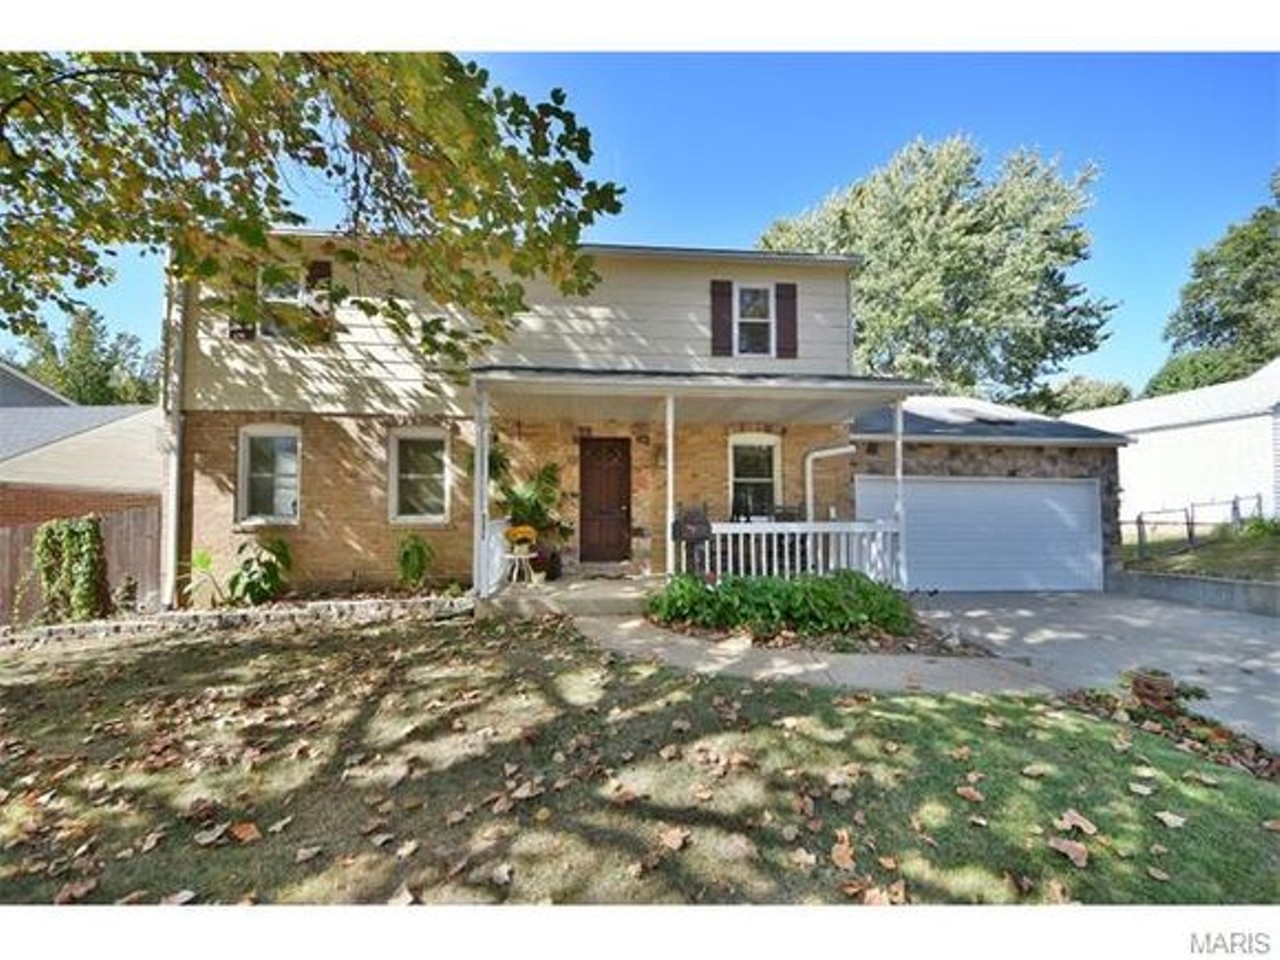 5843 Kingwood Drive
$194,900
3 beds / 3 baths / 1,728 sqft
Welcome home to St. Louis Hills, where you'll be right next to Francis Park and the bike paths of River Des Peres Park.